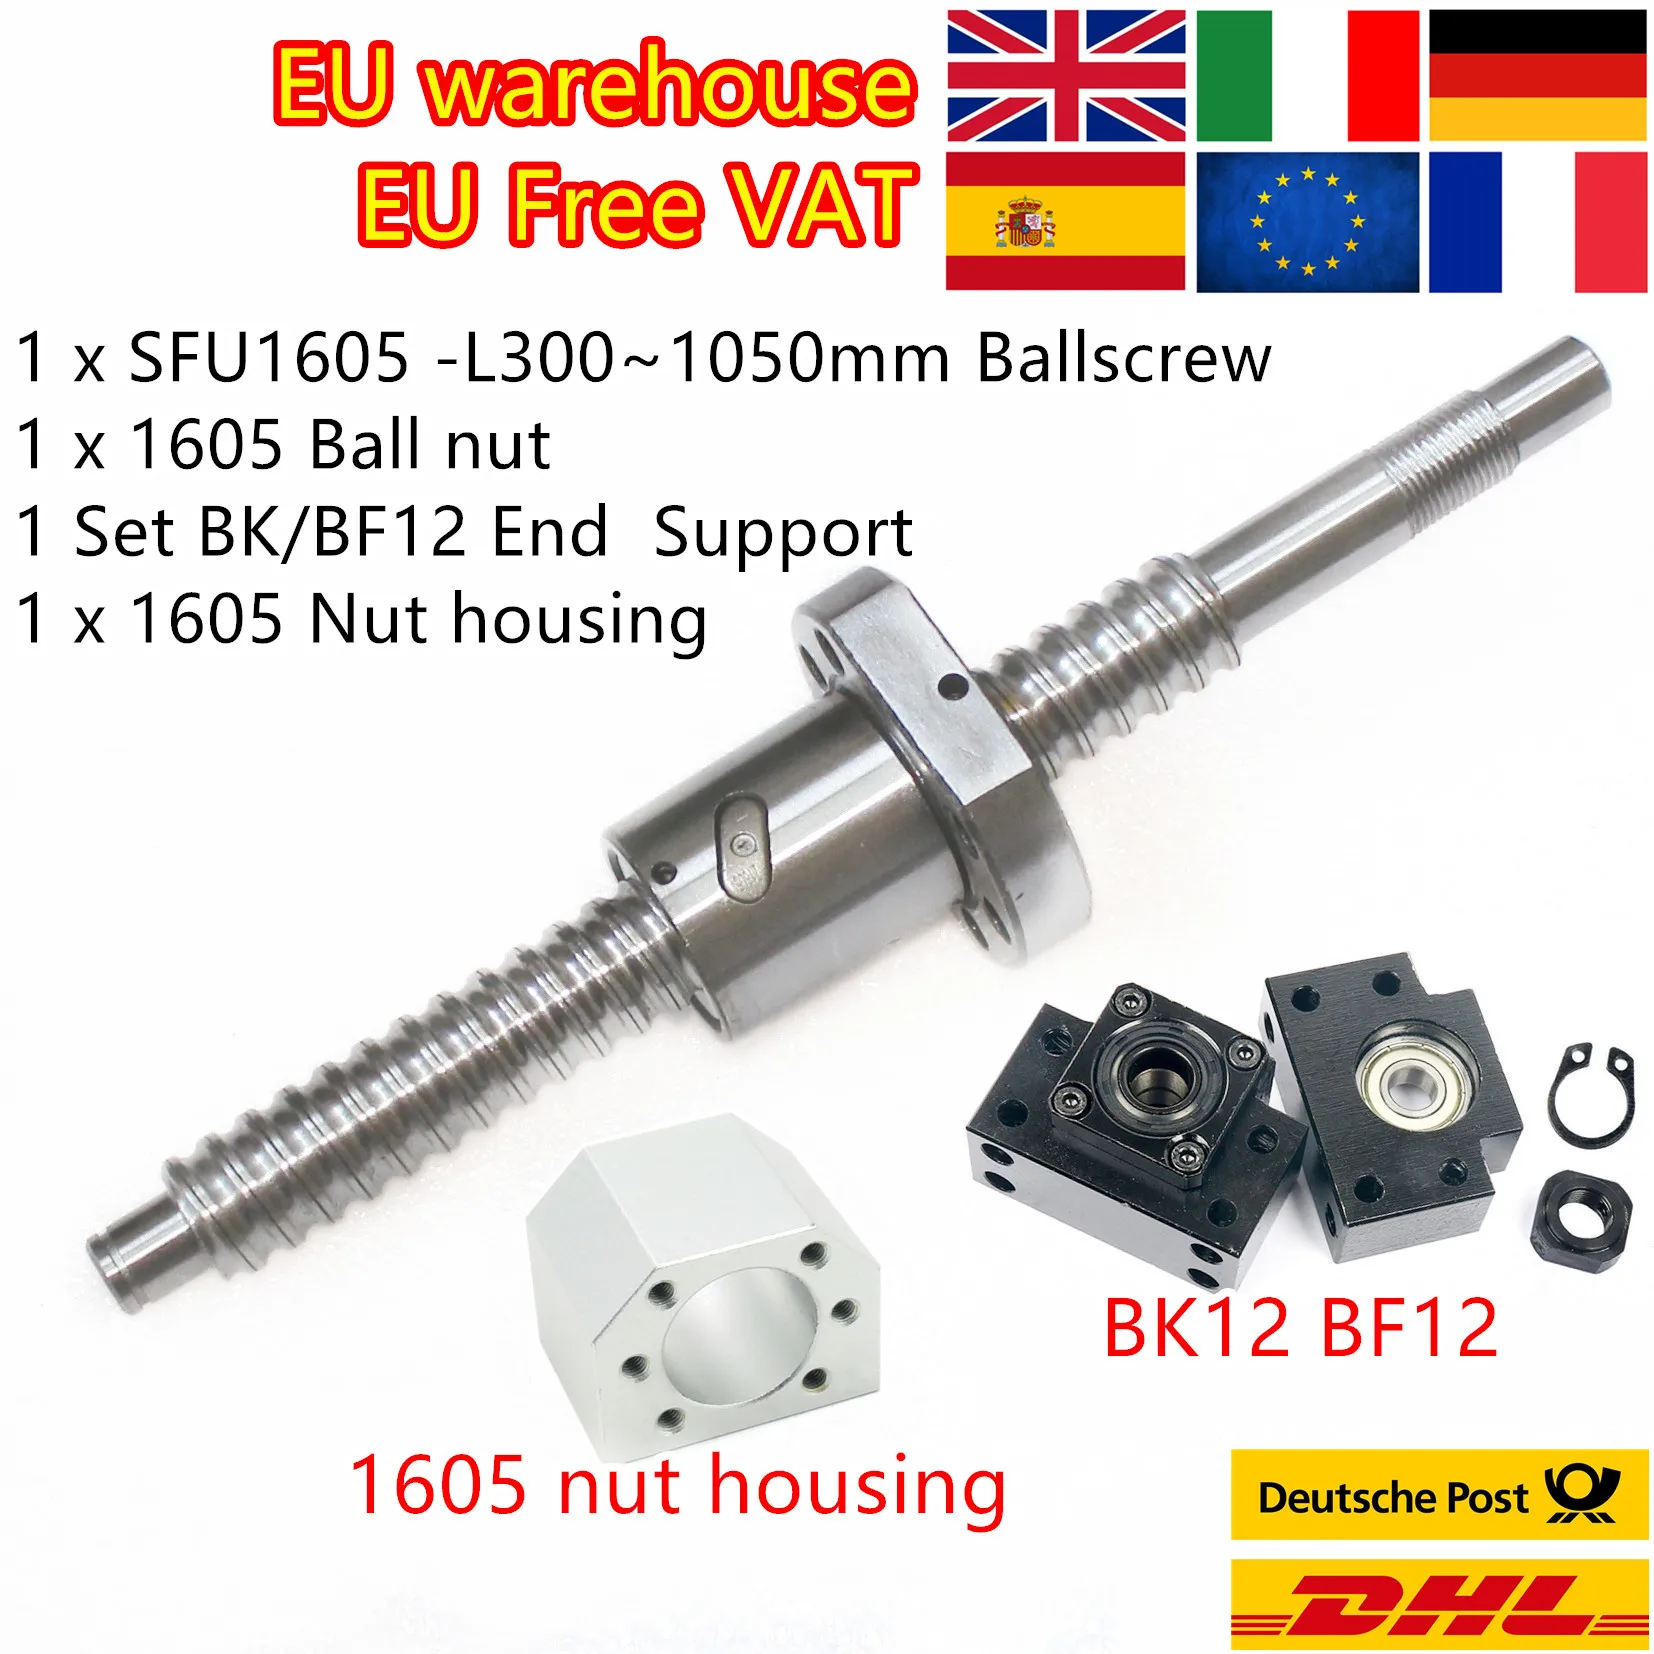 

「EU Free Ship」RM /SFU1605 Ball Screw-300mm 500mm 800mm 1050mm with End Machined & BK/BF12 End Support & 1605 Nut housing for CNC